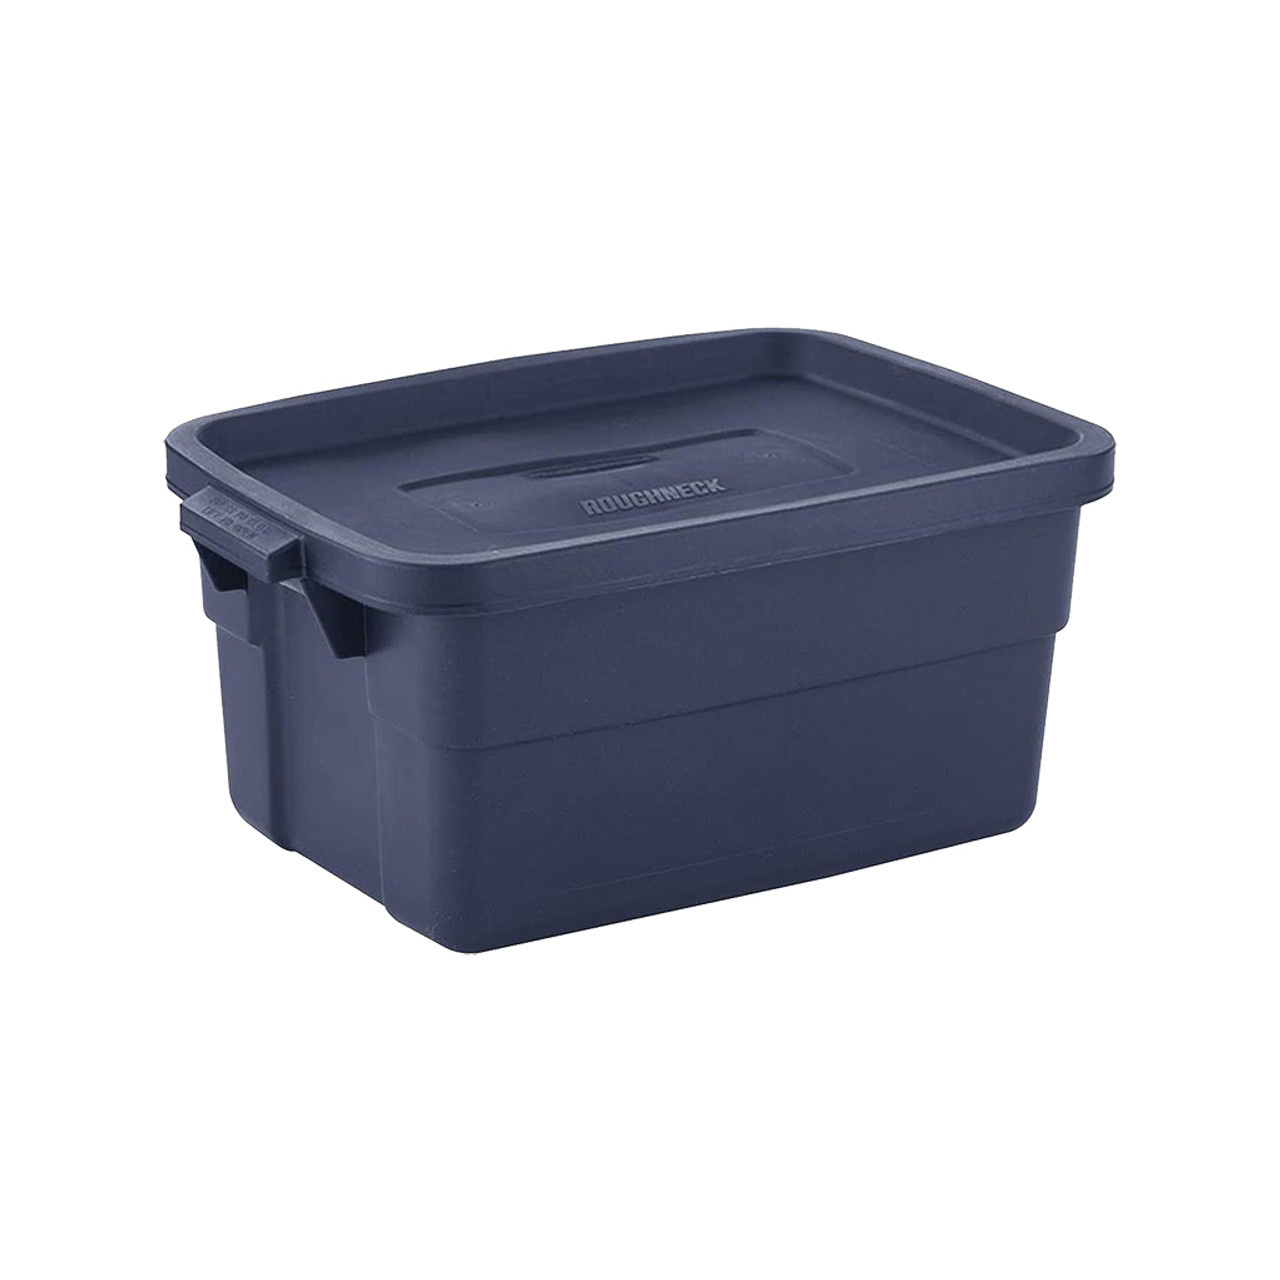 Rubbermaid Roughneck Storage Tote, 3 Gallon - Midwest Technology